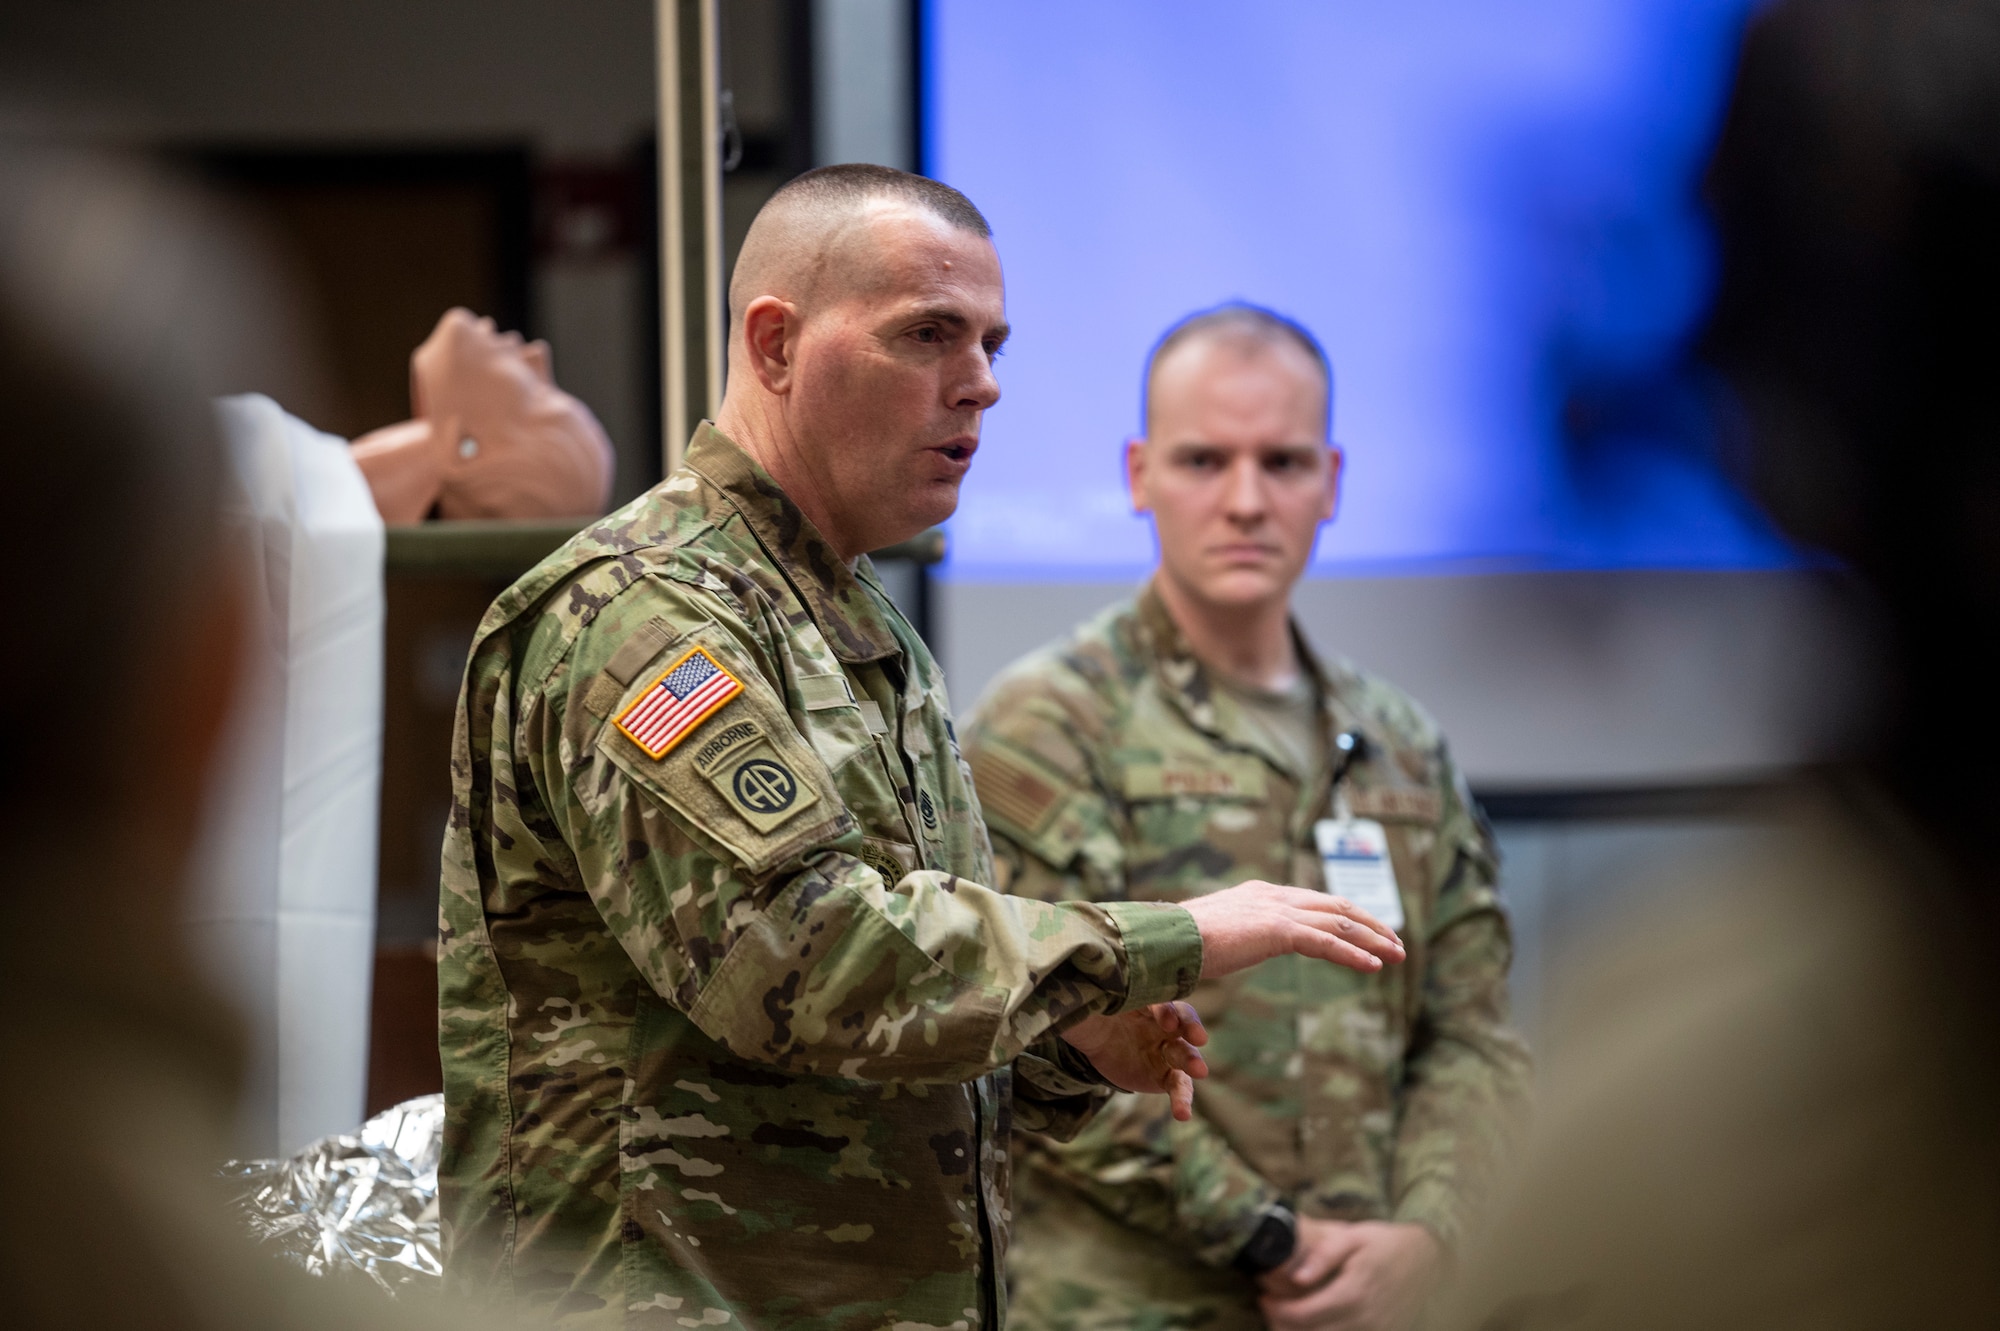 Command Sgt. Maj. Jack Love, U.S. Forces Korea Senior Enlisted Advisor, speaks with members assigned to the 51st Medical Group during his visit at Osan Air Base, Republic of Korea, Feb. 16, 2023.